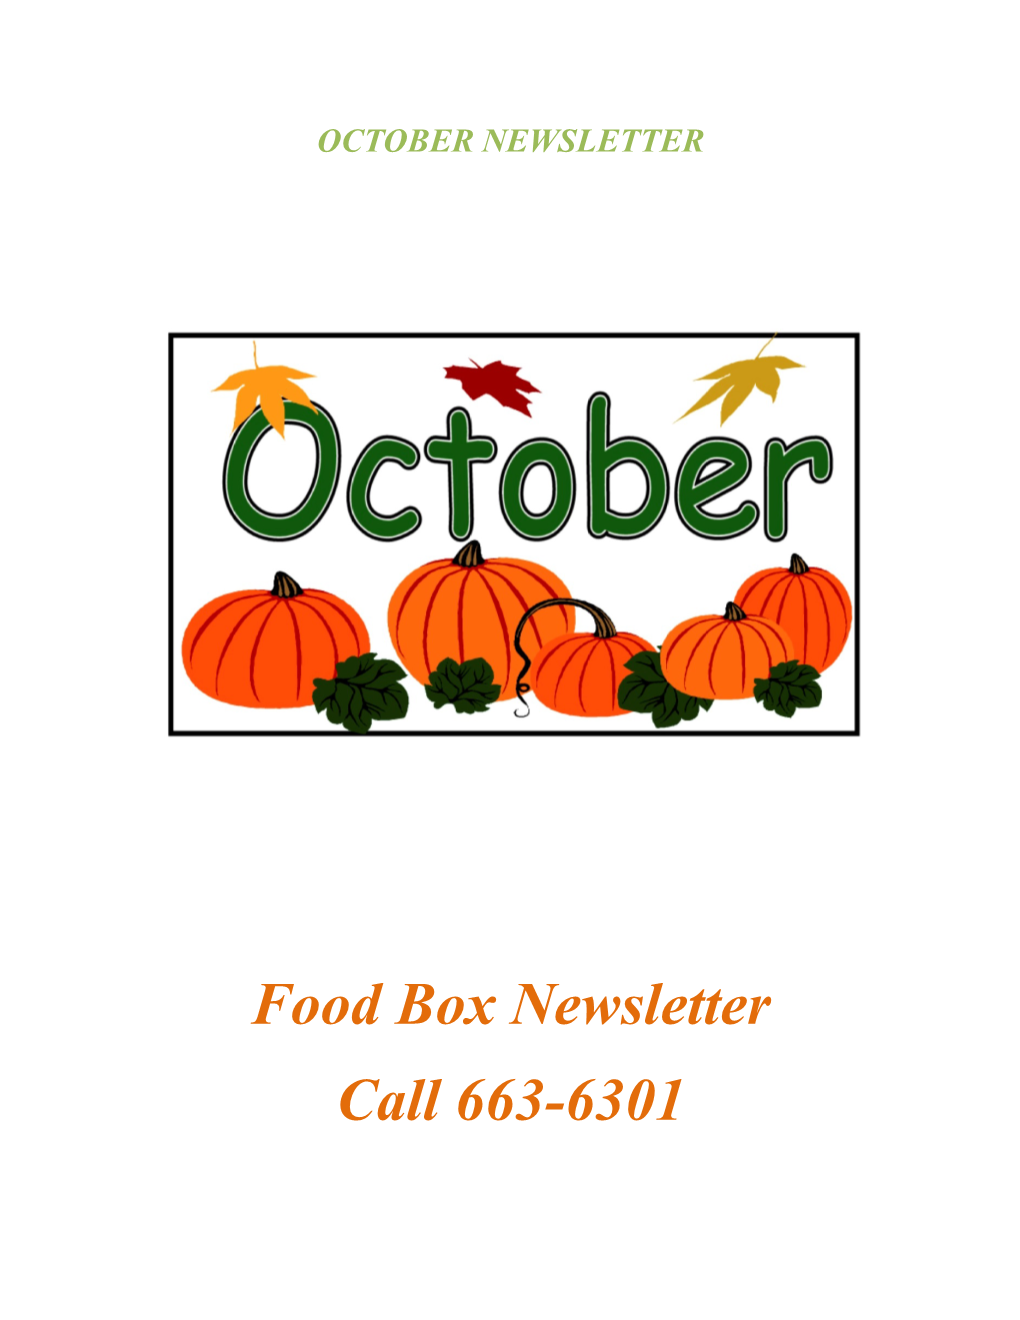 Food Box Newsletter Call 663-6301